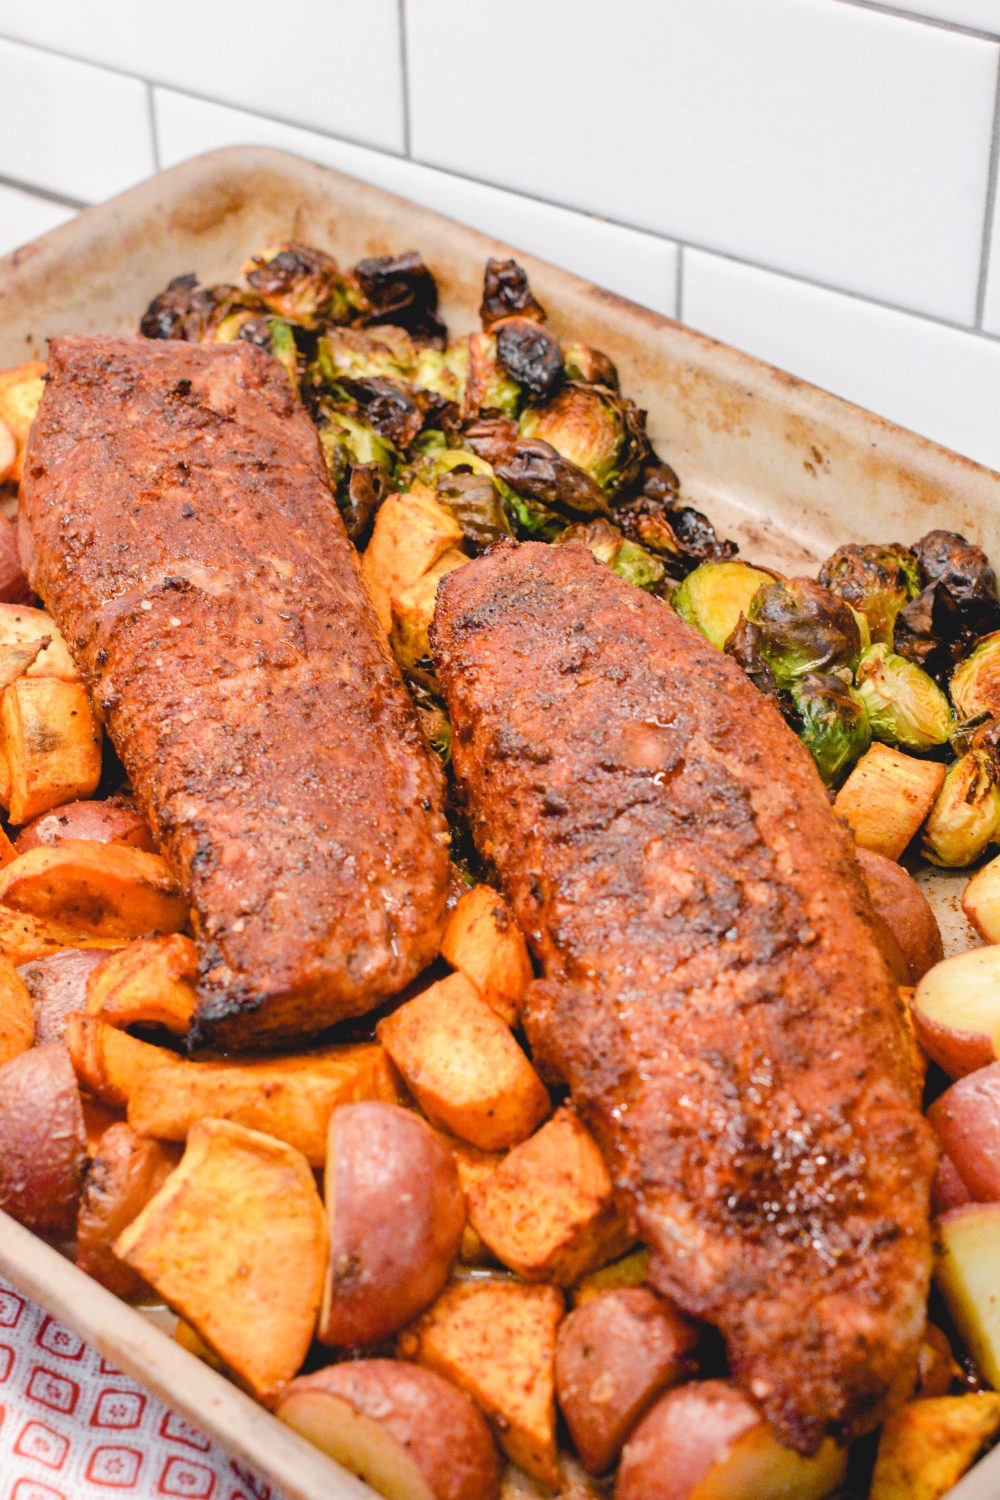 The sheet pan pork tenderloin is rubbed in a sweet and spicy dry rub that is sprinkled on the cut-up sweet potatoes, red potatoes, and Brussels sprouts before it is oven baked. 